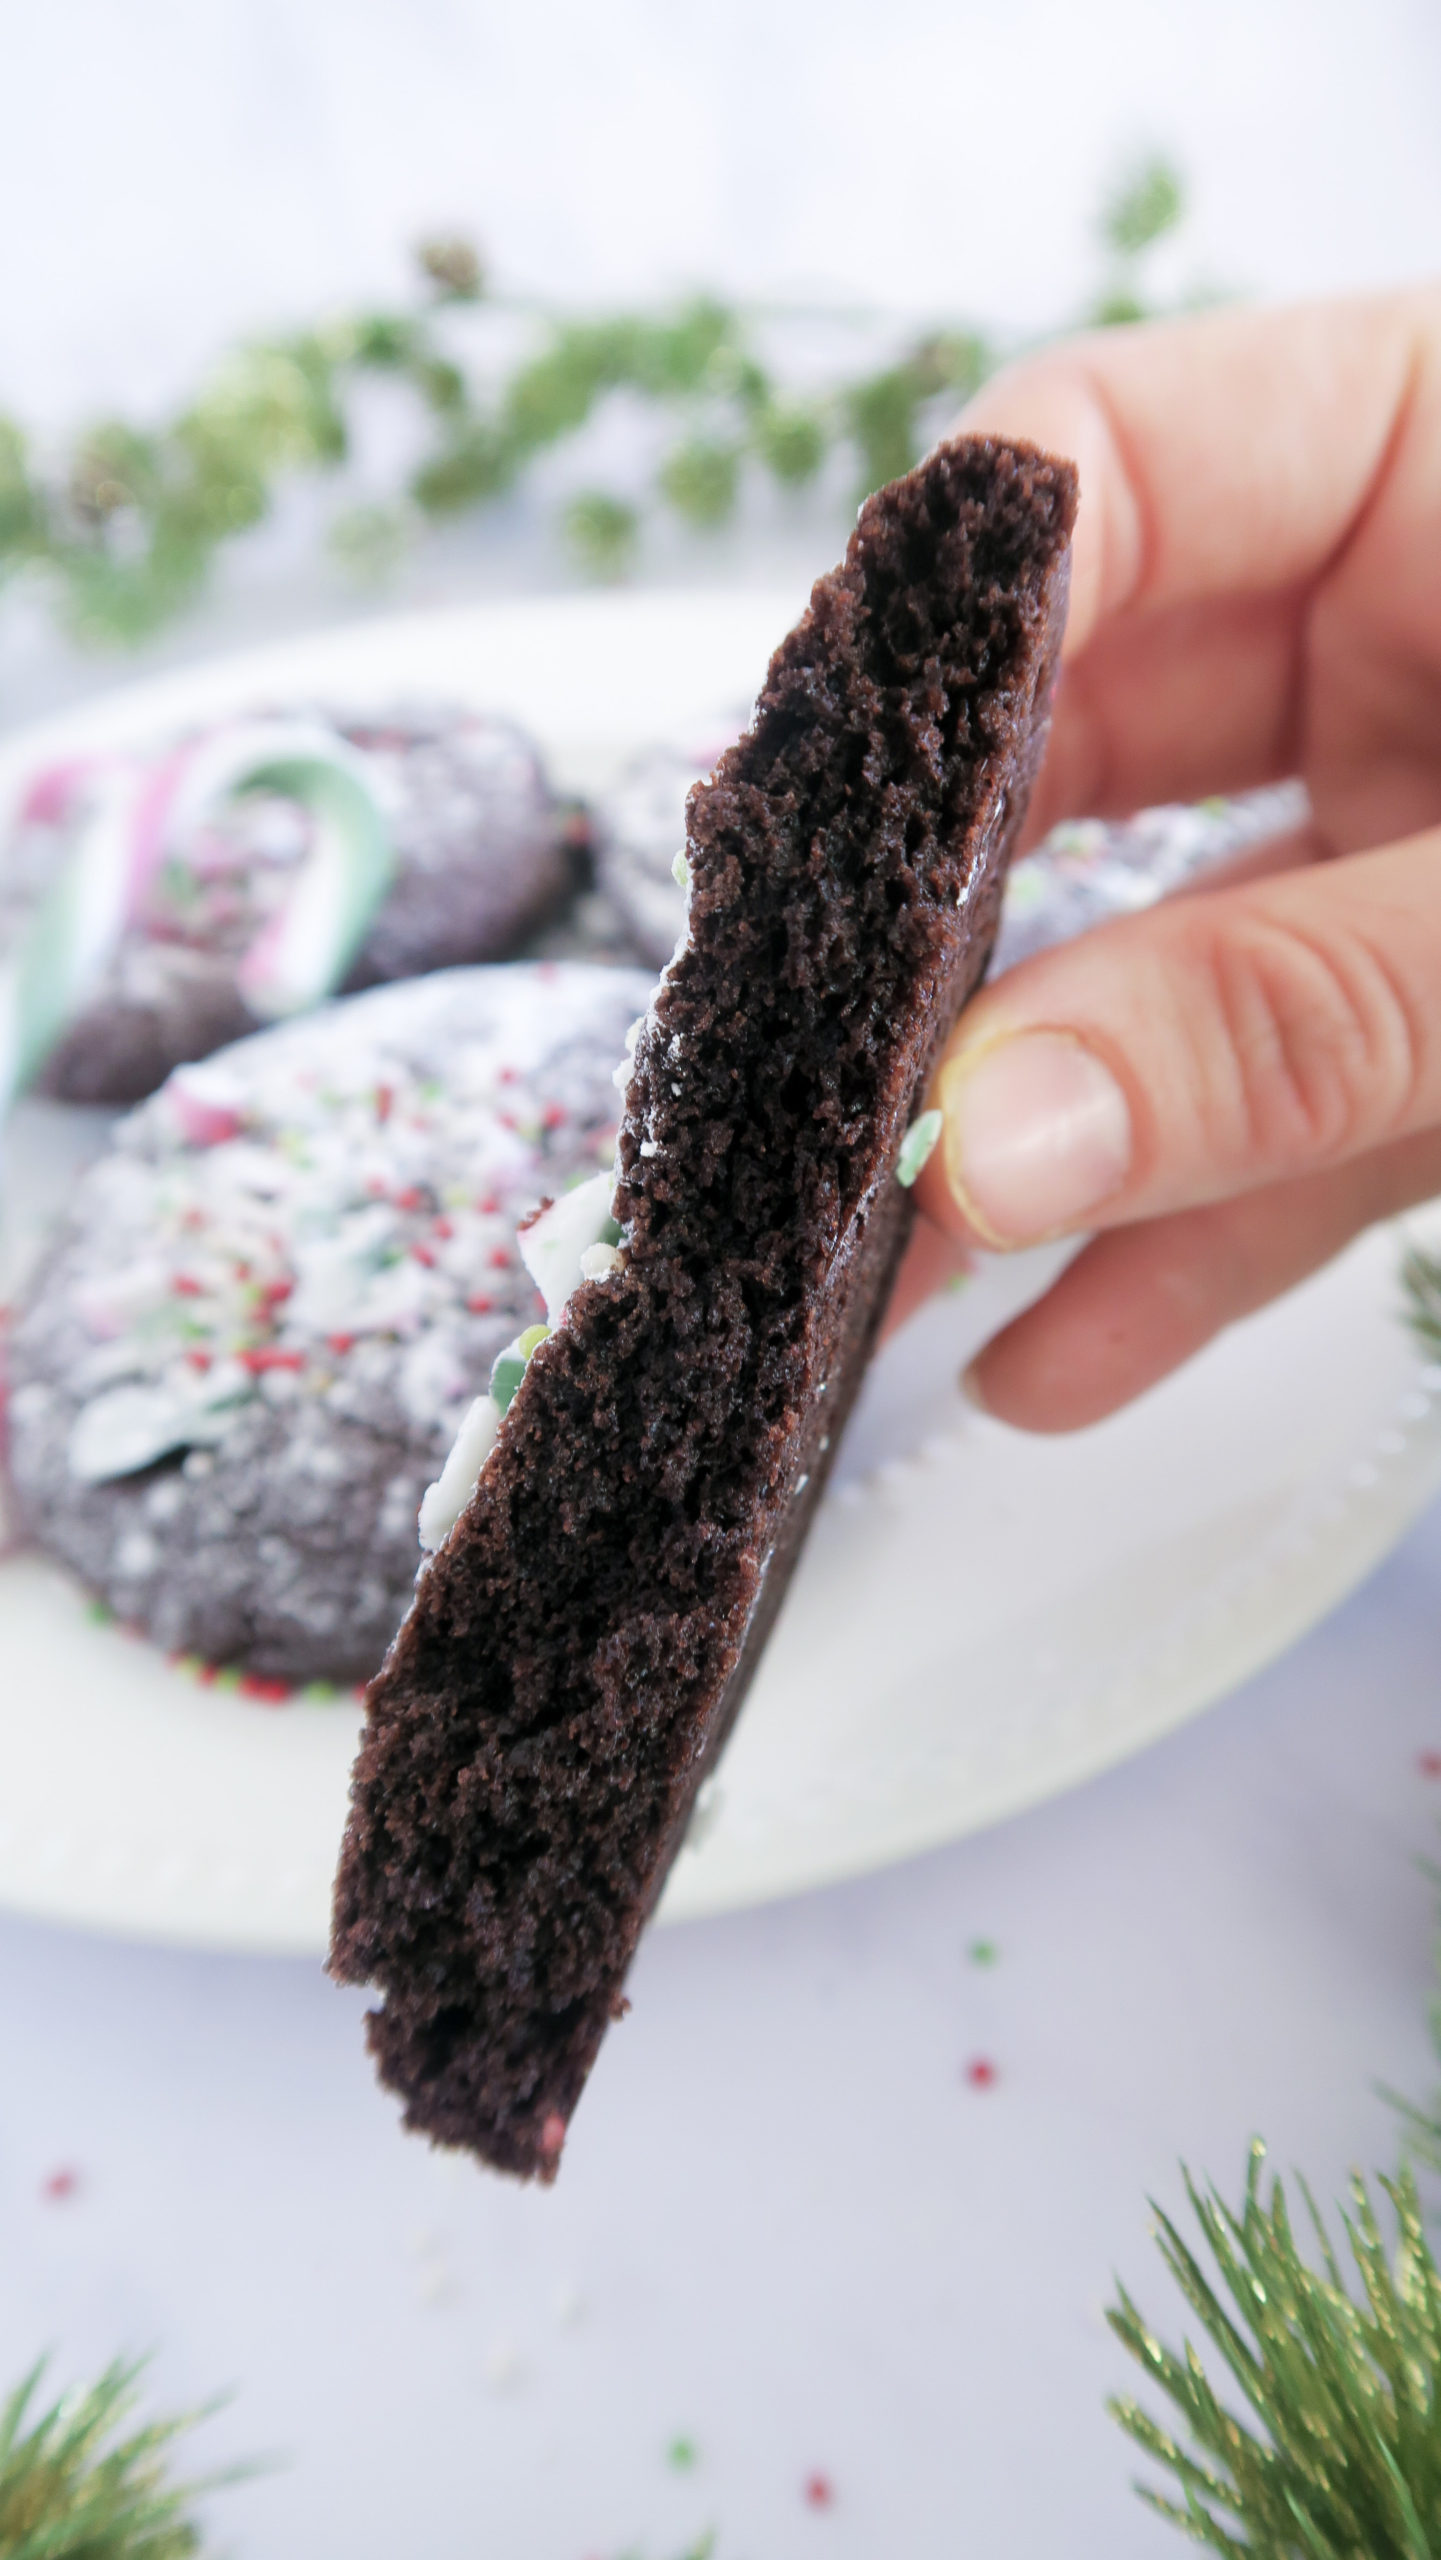 Inside the chocolate peppermint cookie